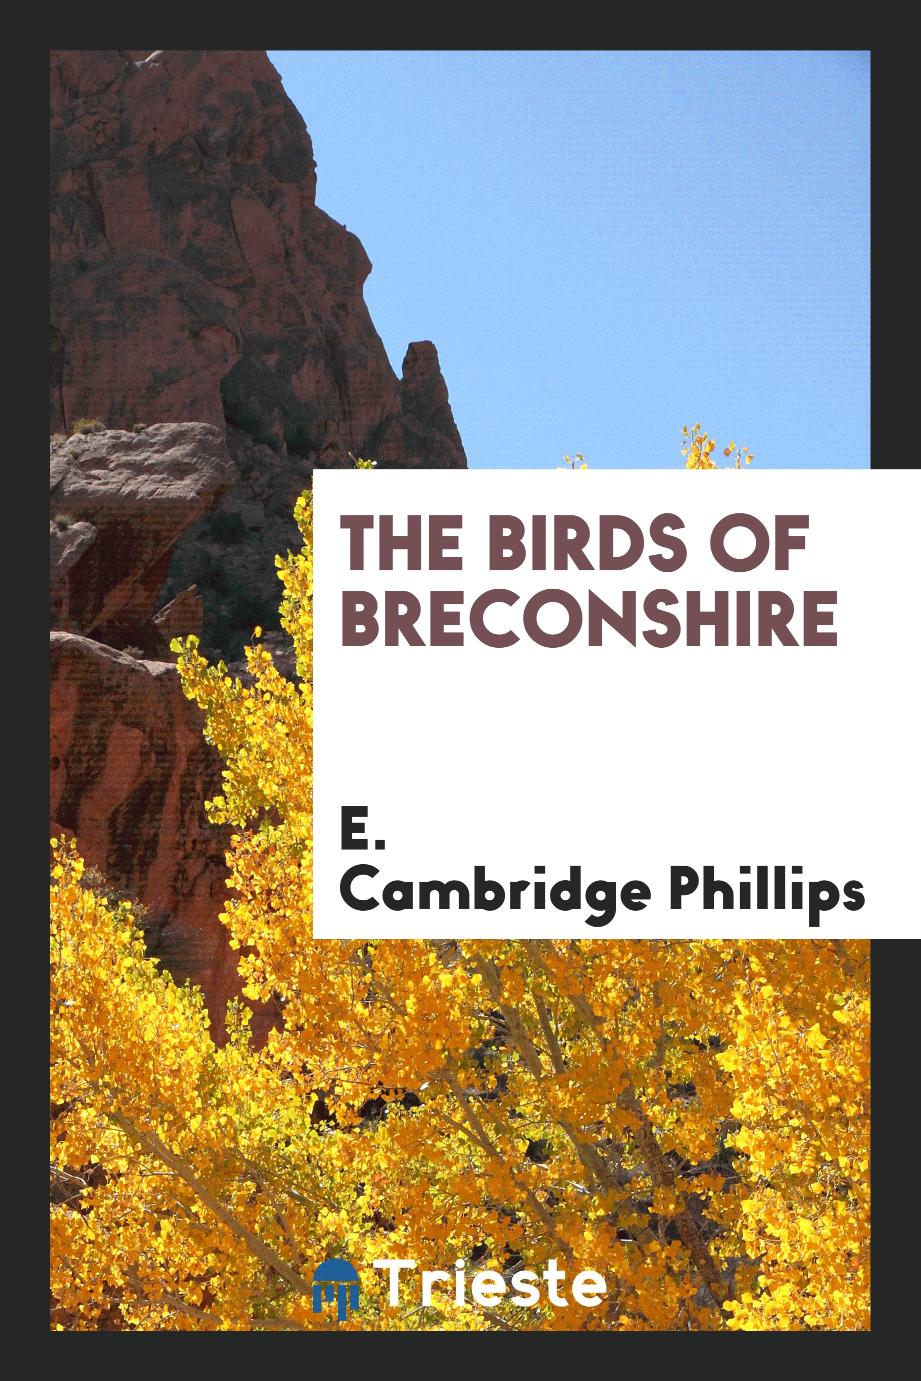 The birds of Breconshire